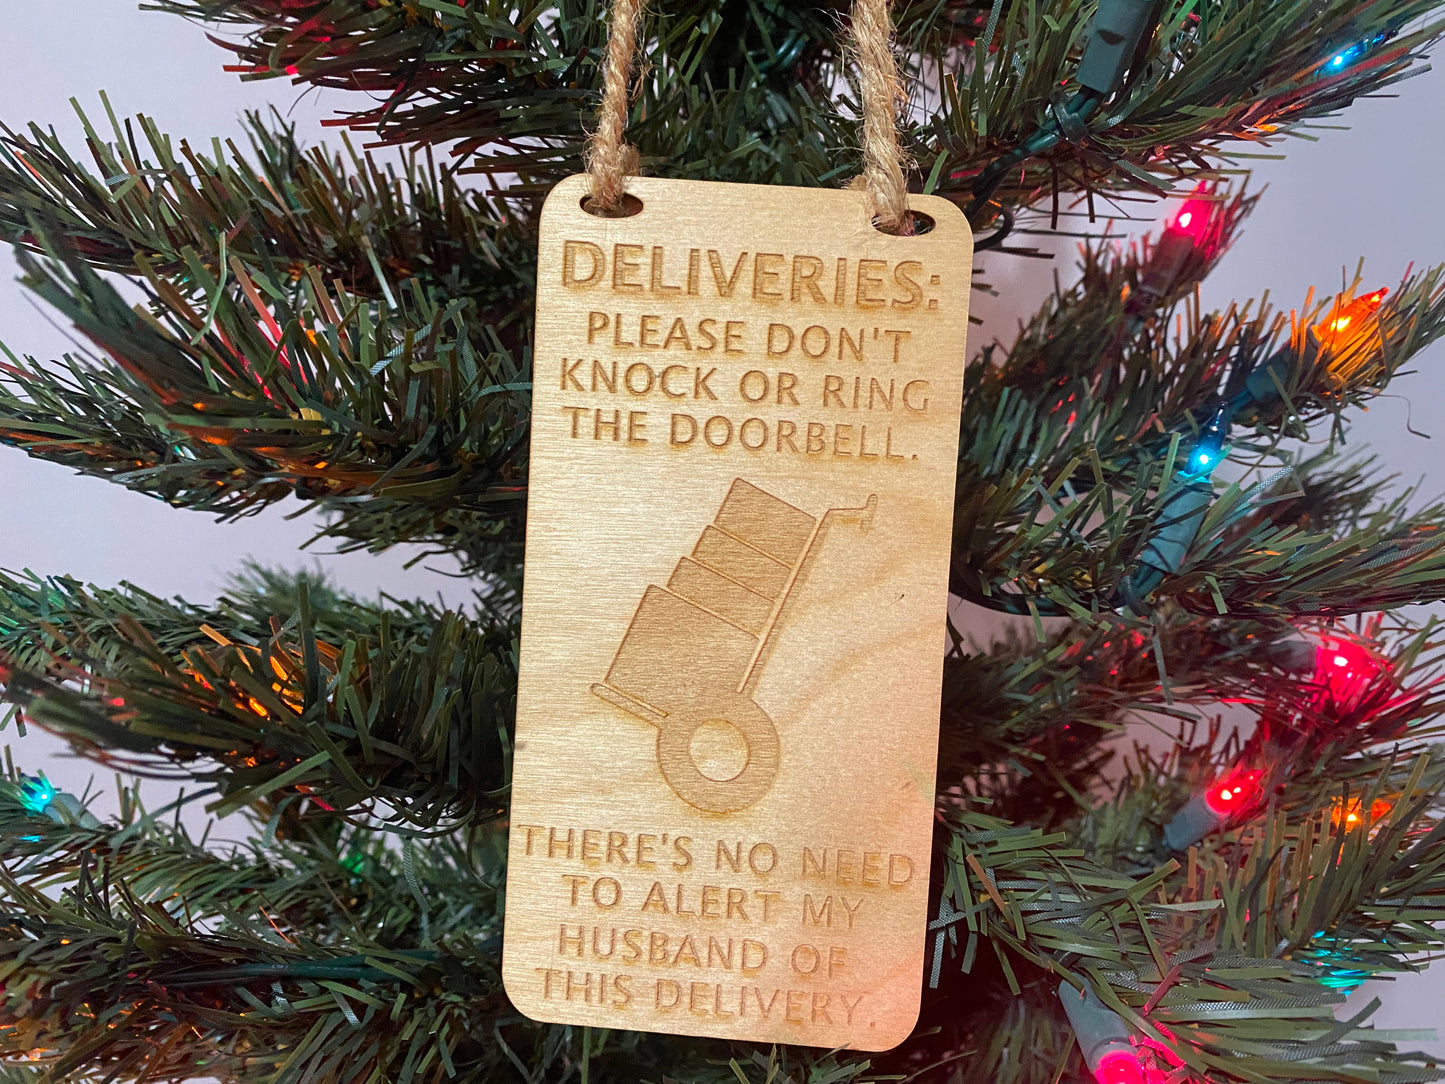 Funny delivery sign/ornament